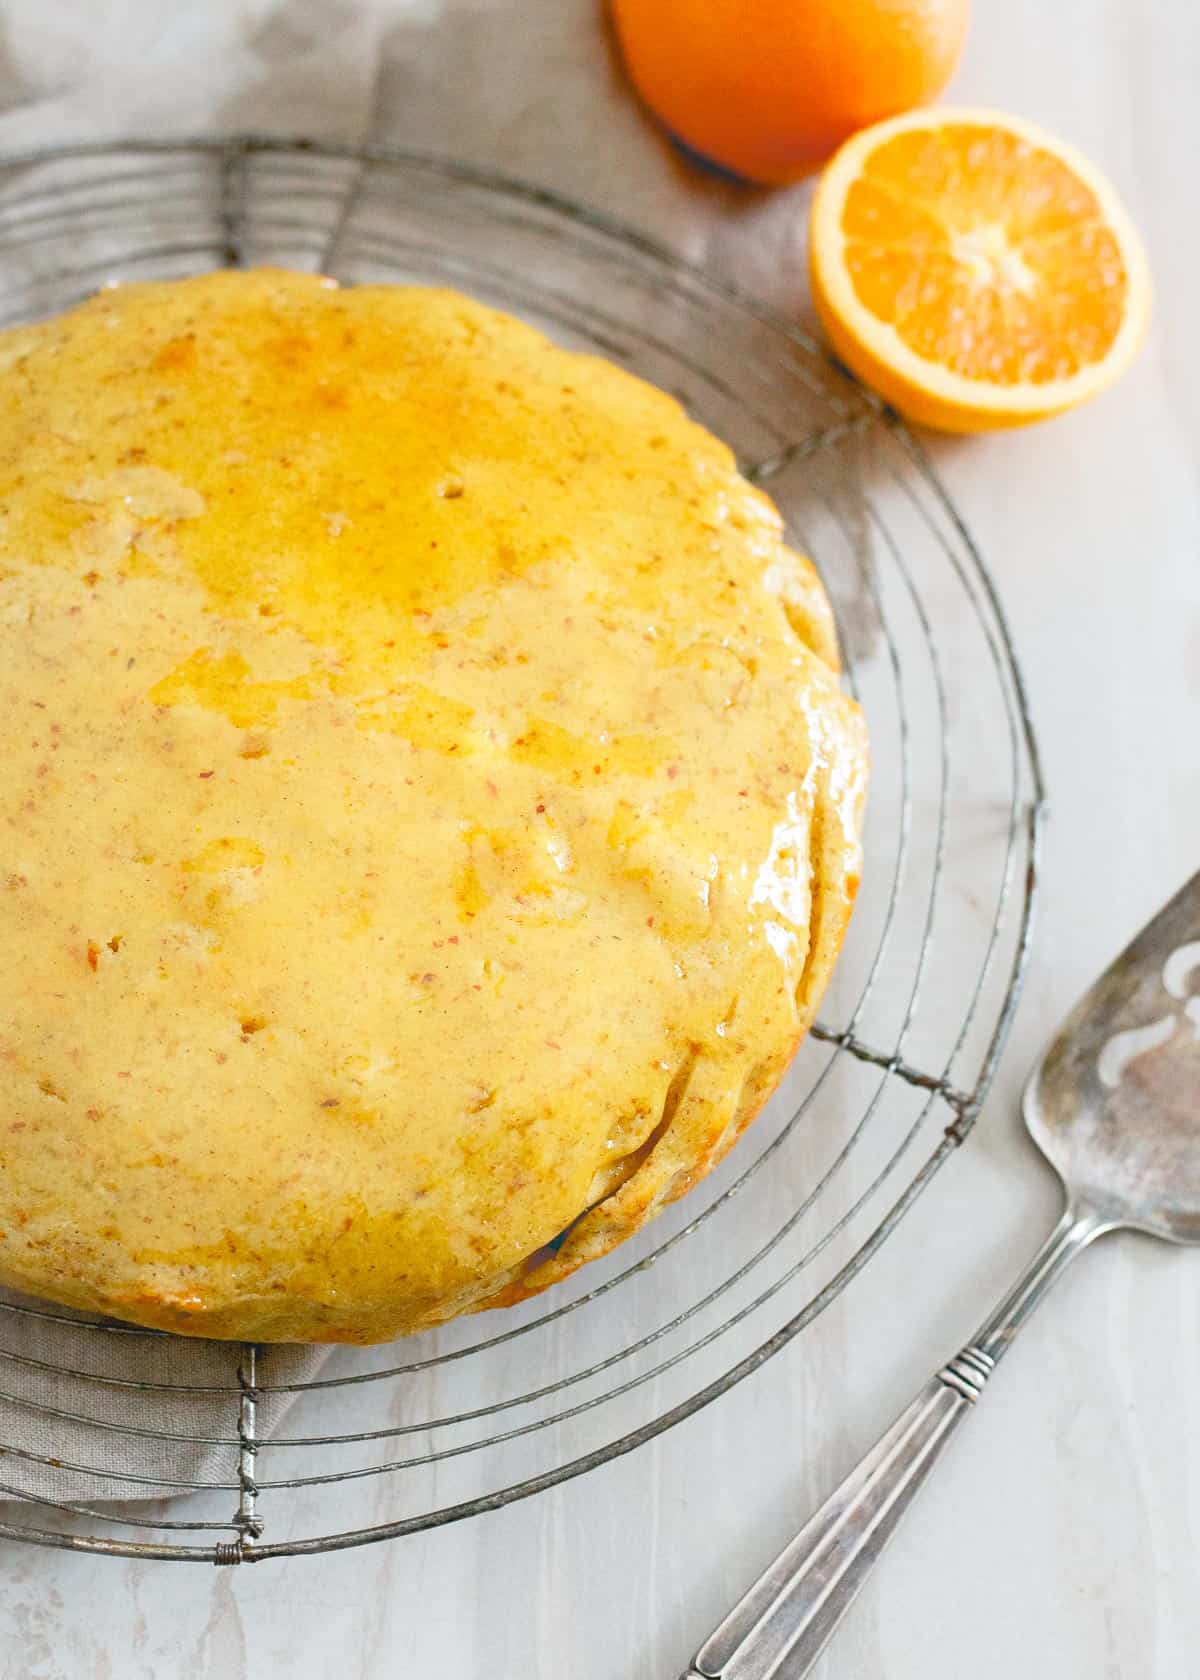 This glazed orange cardamom cake is a wonderfully simple dessert bursting with winter citrus and spice, perfect for your holiday table.